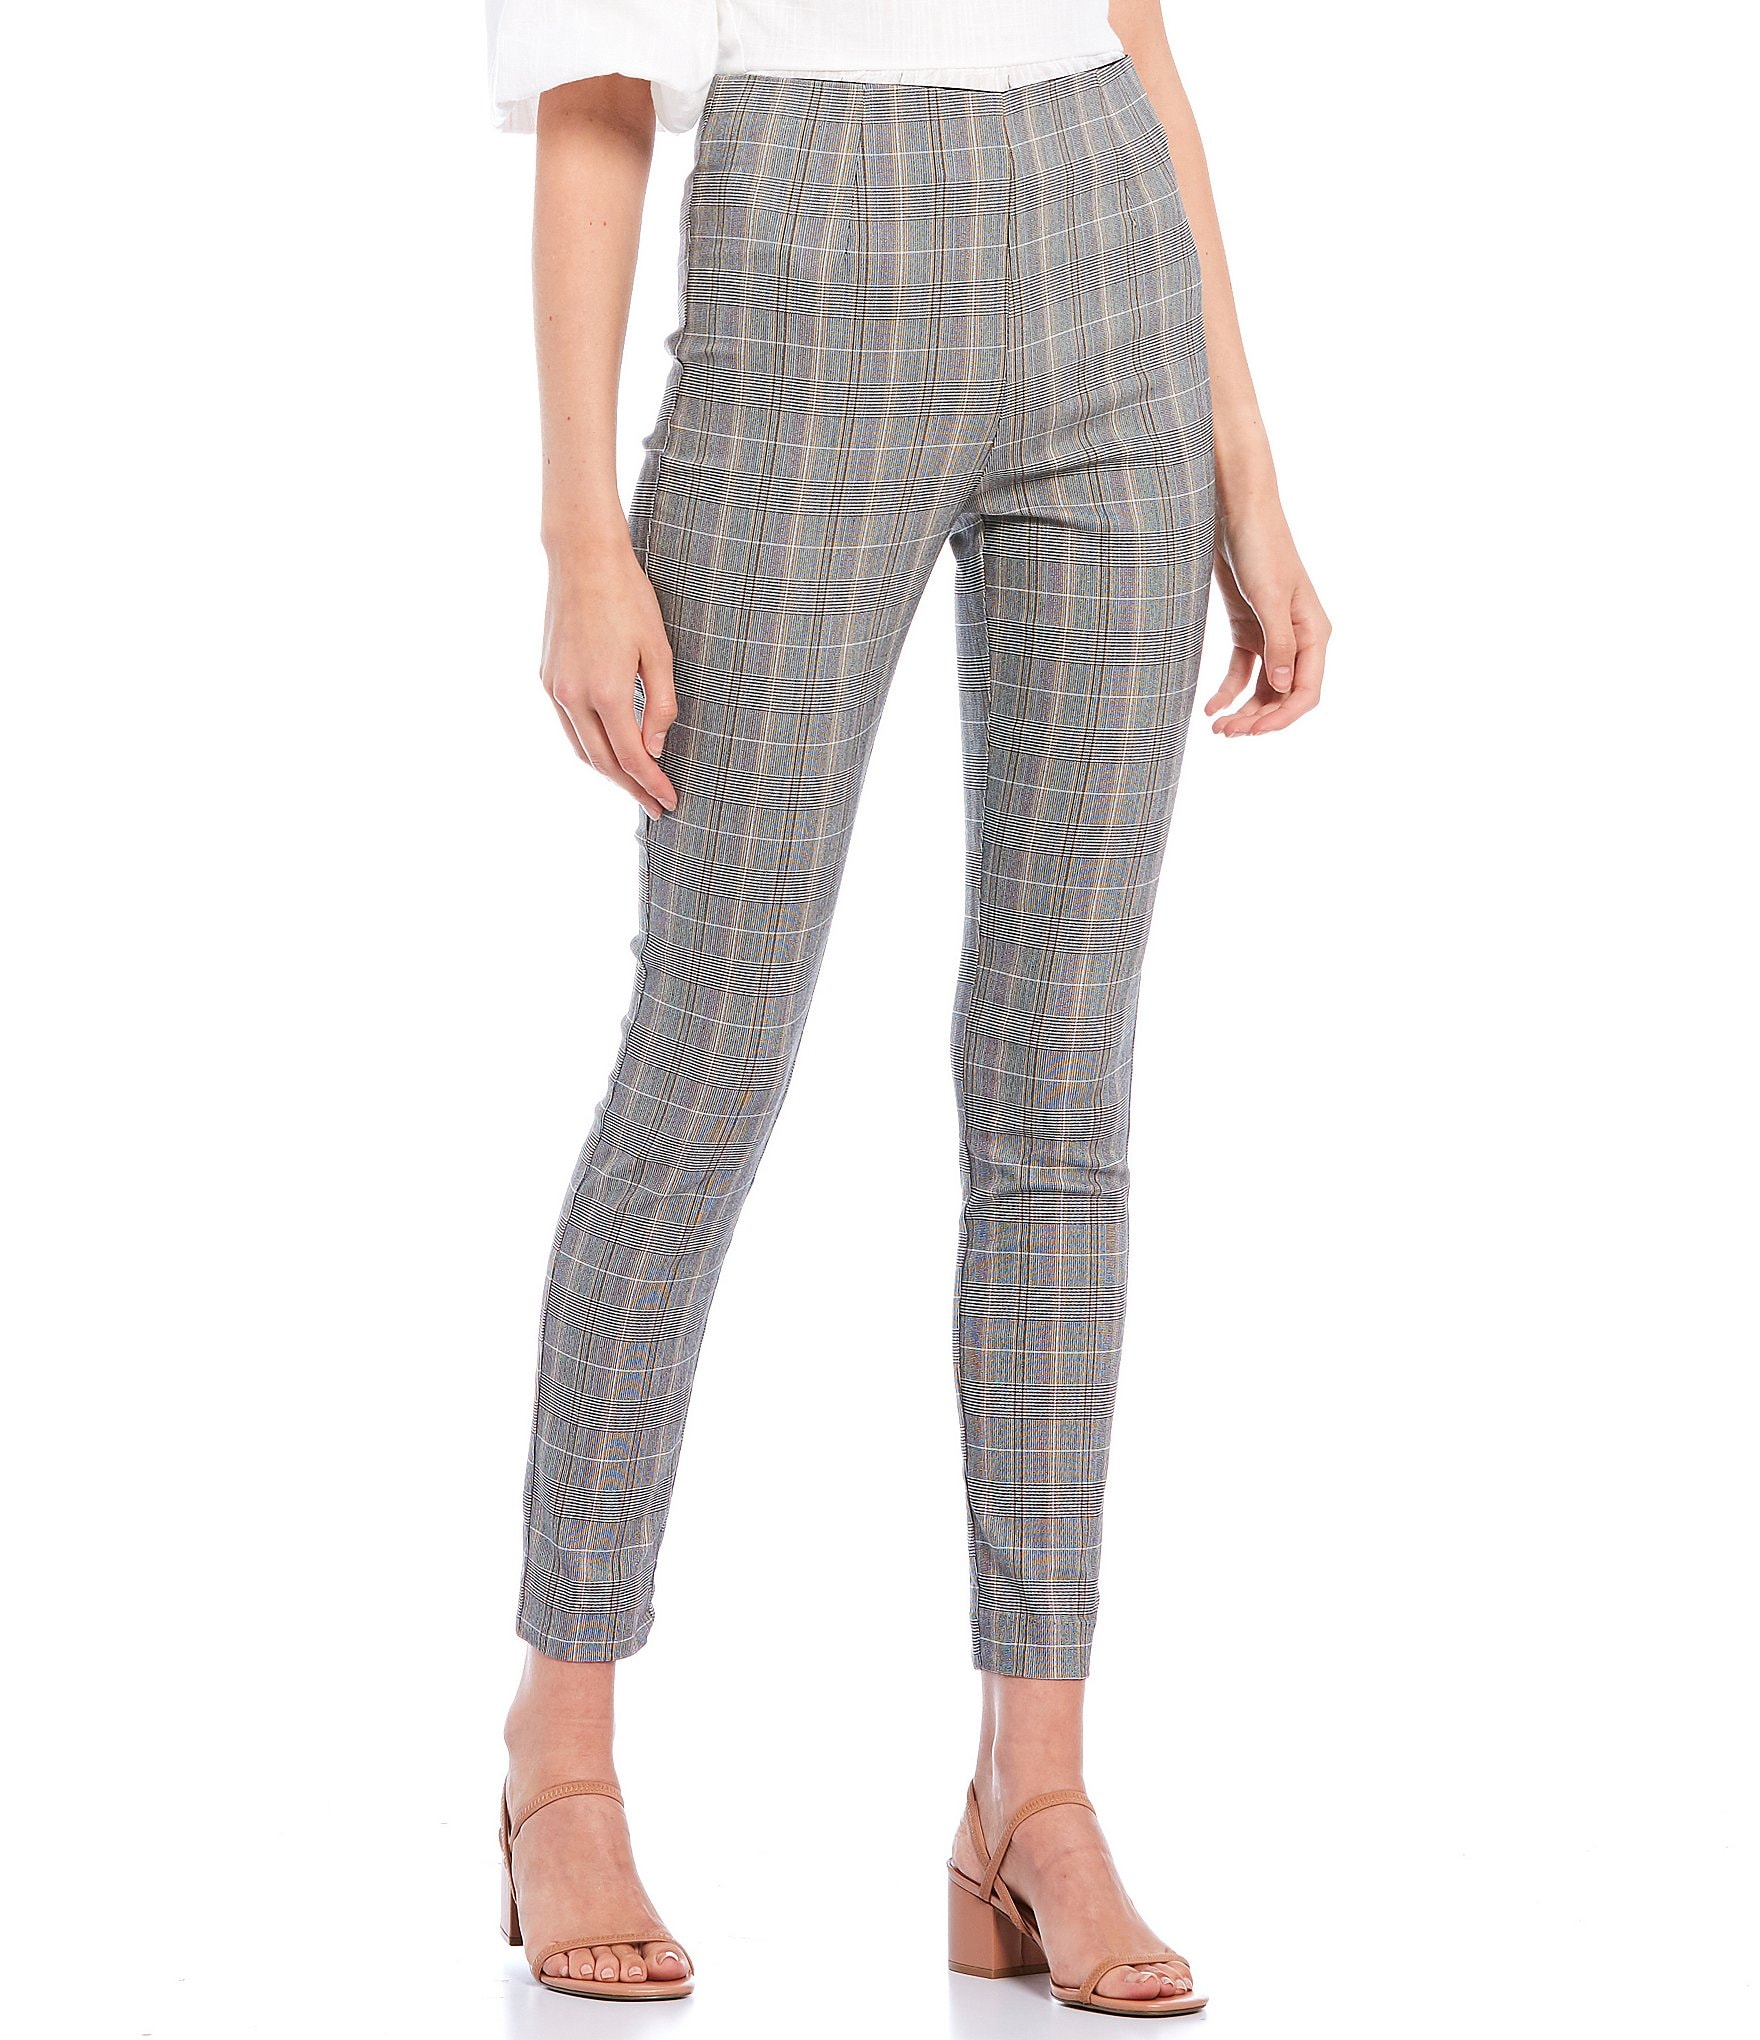 grey plaid pants Womens Fashion Bottoms Other Bottoms on Carousell